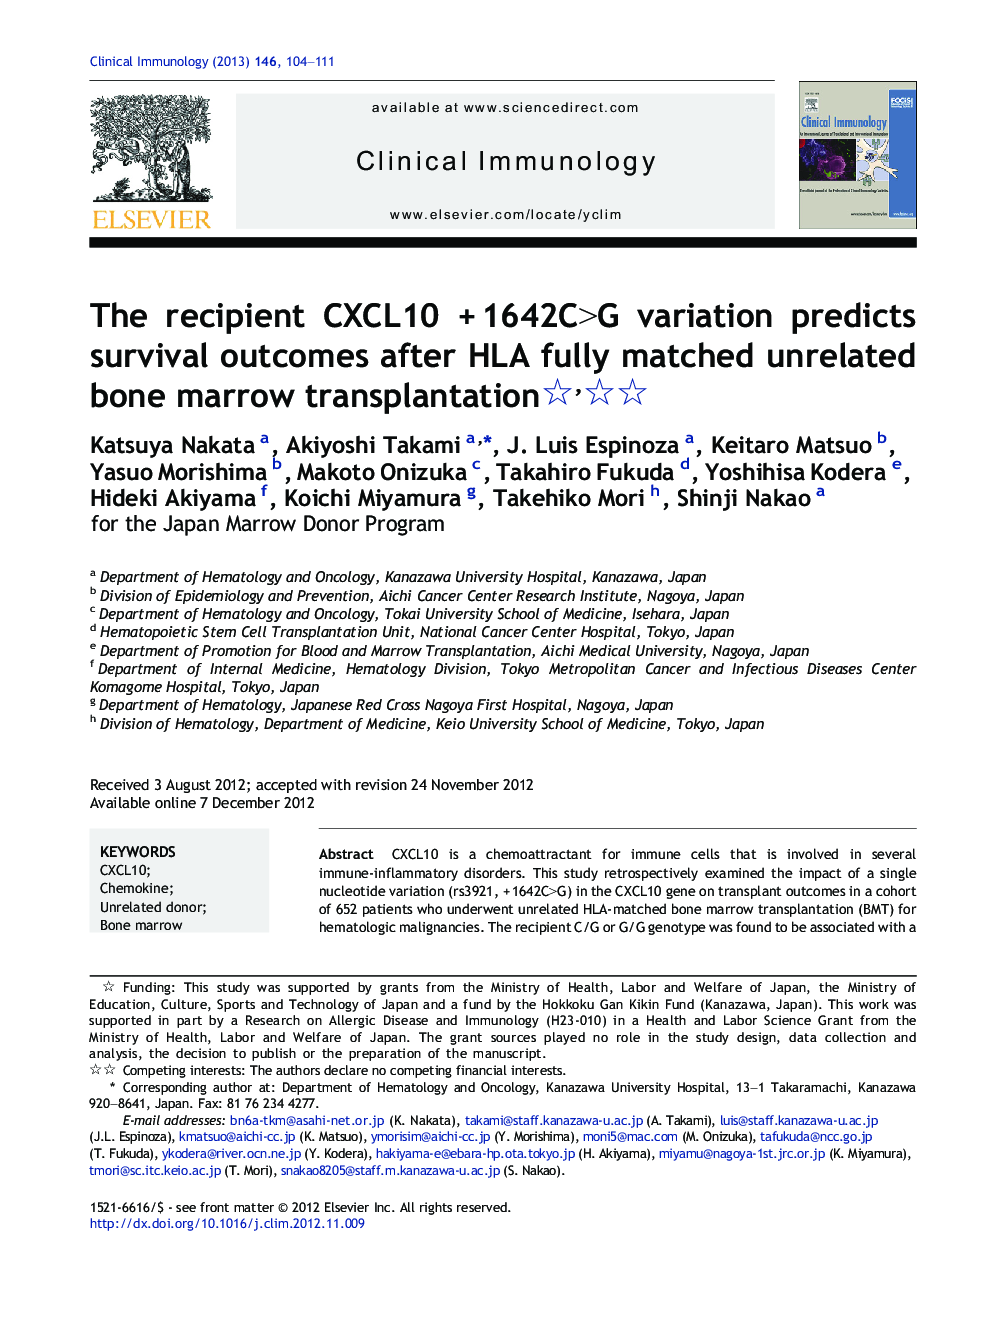 The recipient CXCL10 + 1642C>G variation predicts survival outcomes after HLA fully matched unrelated bone marrow transplantation 